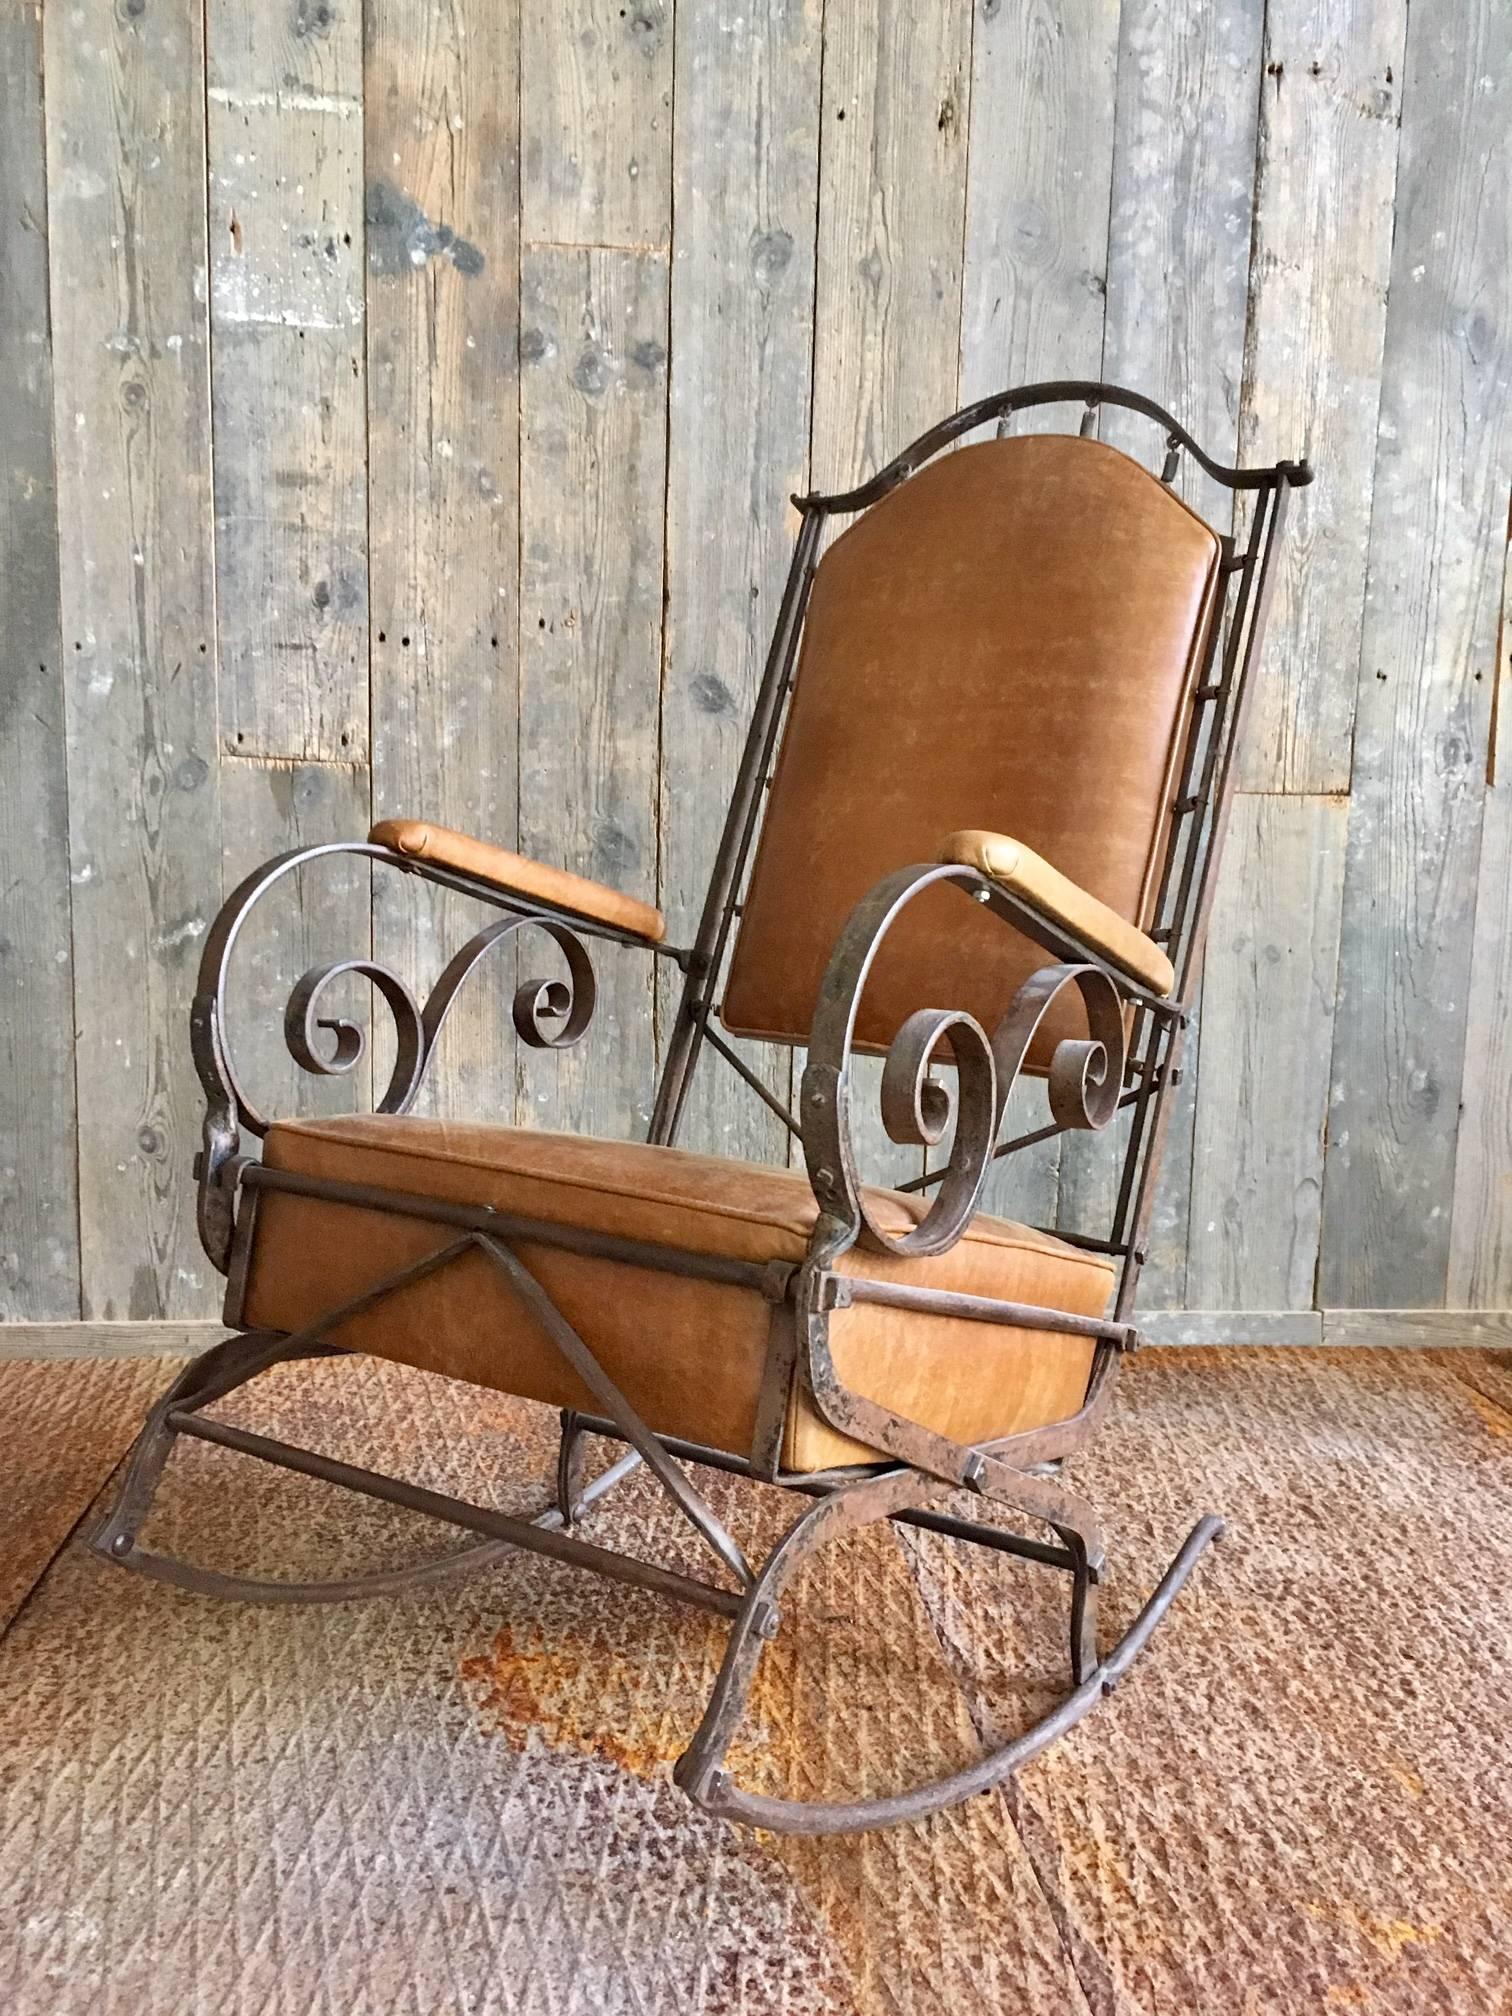 Beautiful French mid-19th century rocking chair. The chair is made from wrought iron and leather, very heavy but also very comfortable. 

The leather back is attached to the iron frame with tension springs. The leather has a beautiful worn look.